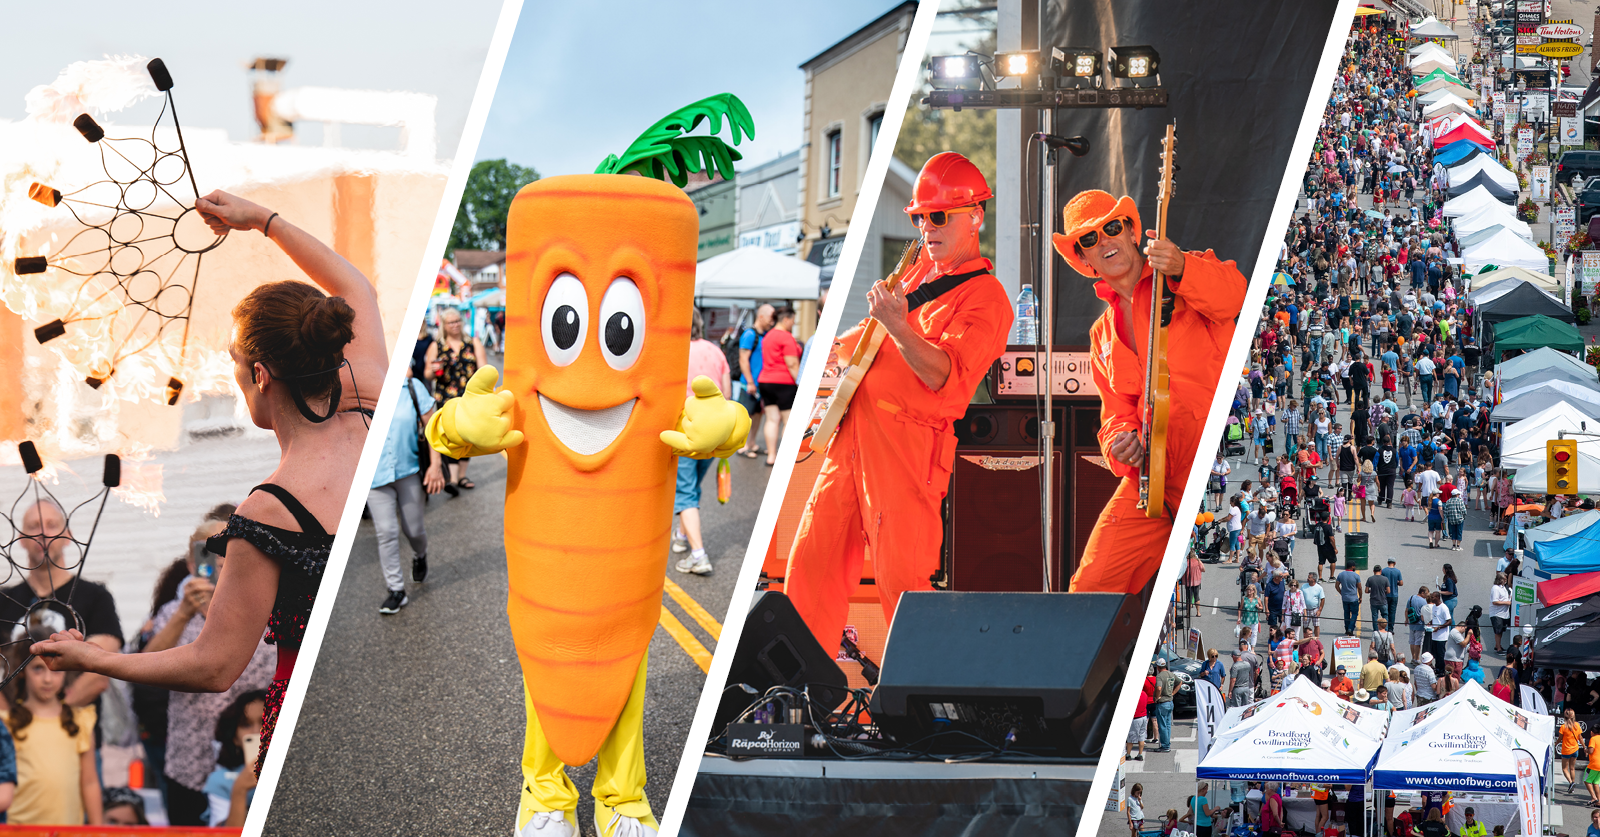 Carrot Fest promo image illustrating entertainers and vendor fair from 2022